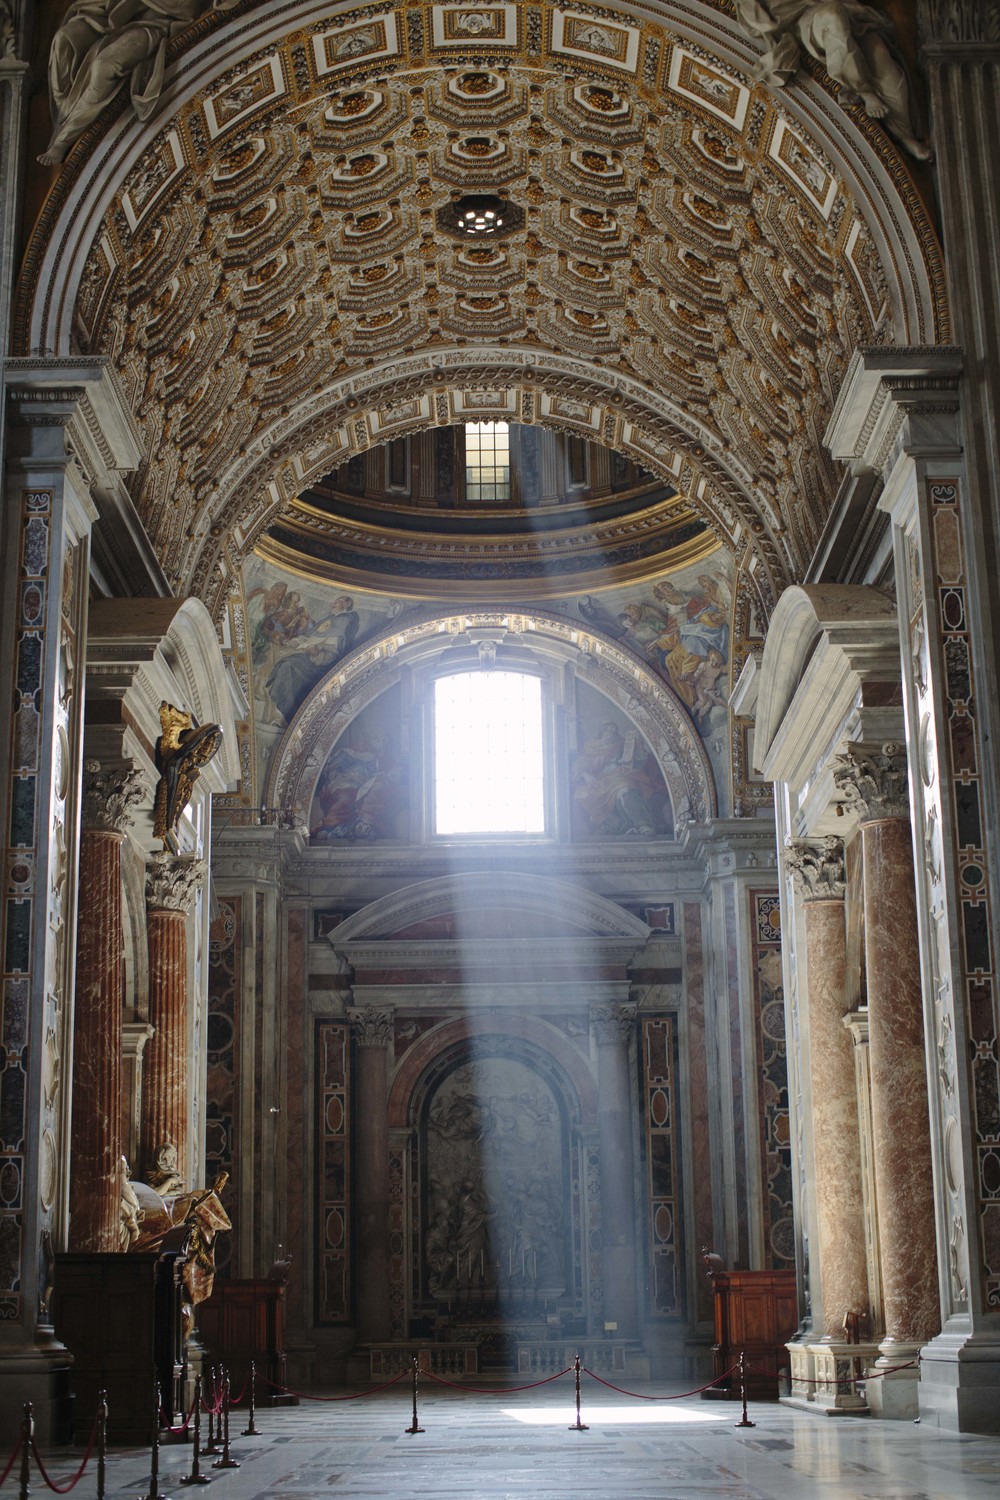 The way the light shines into St. Peter's is unbelievable.